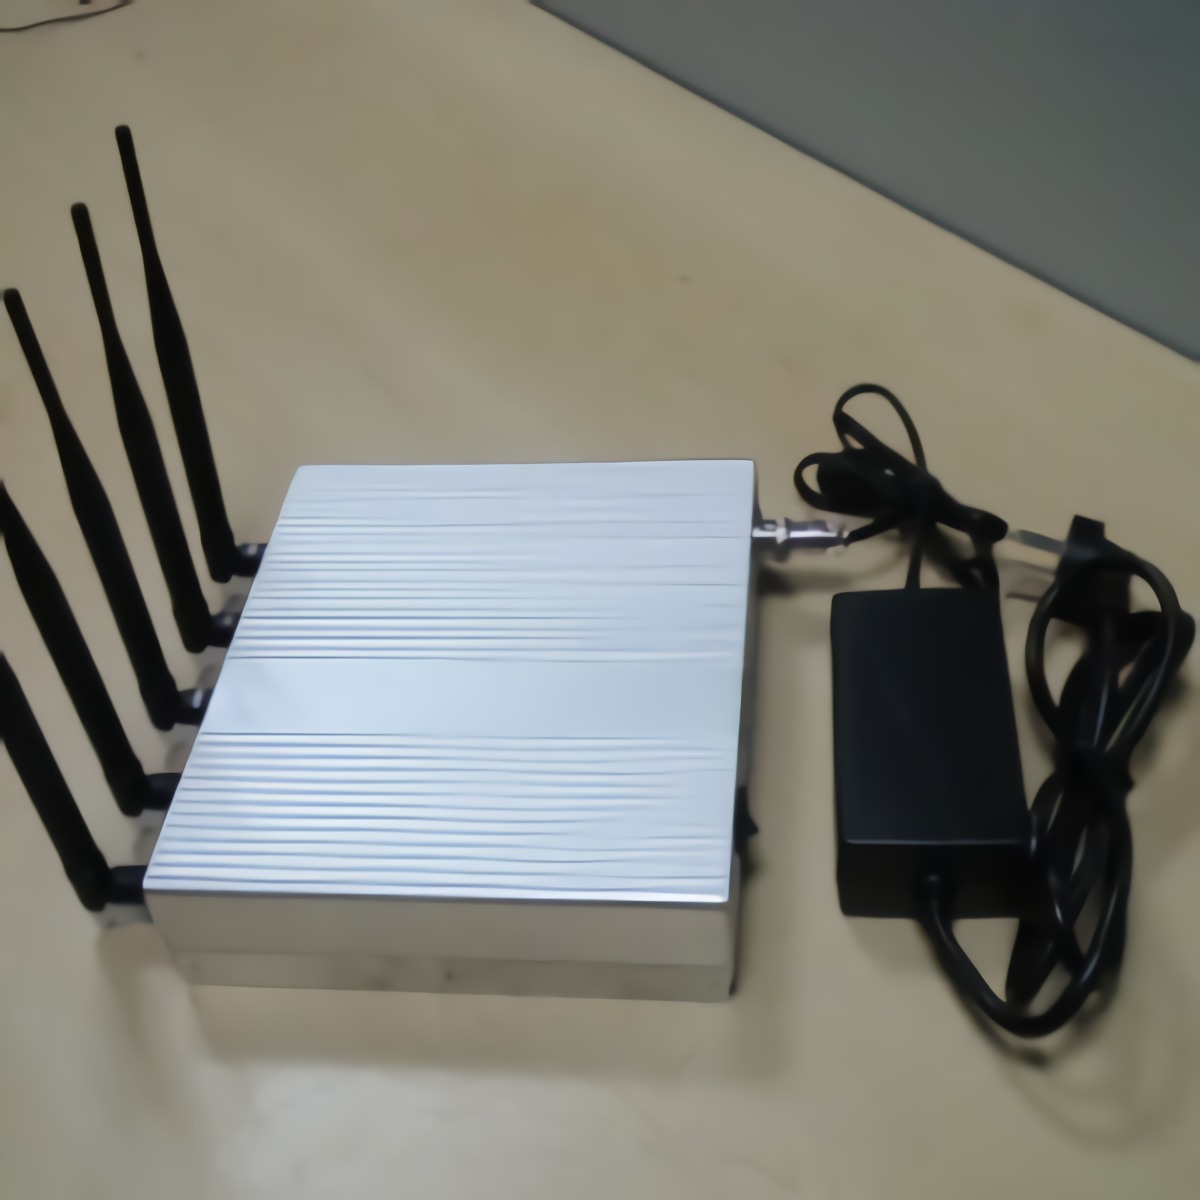 High Quality Cell Phone Jammer within 50M jamming range